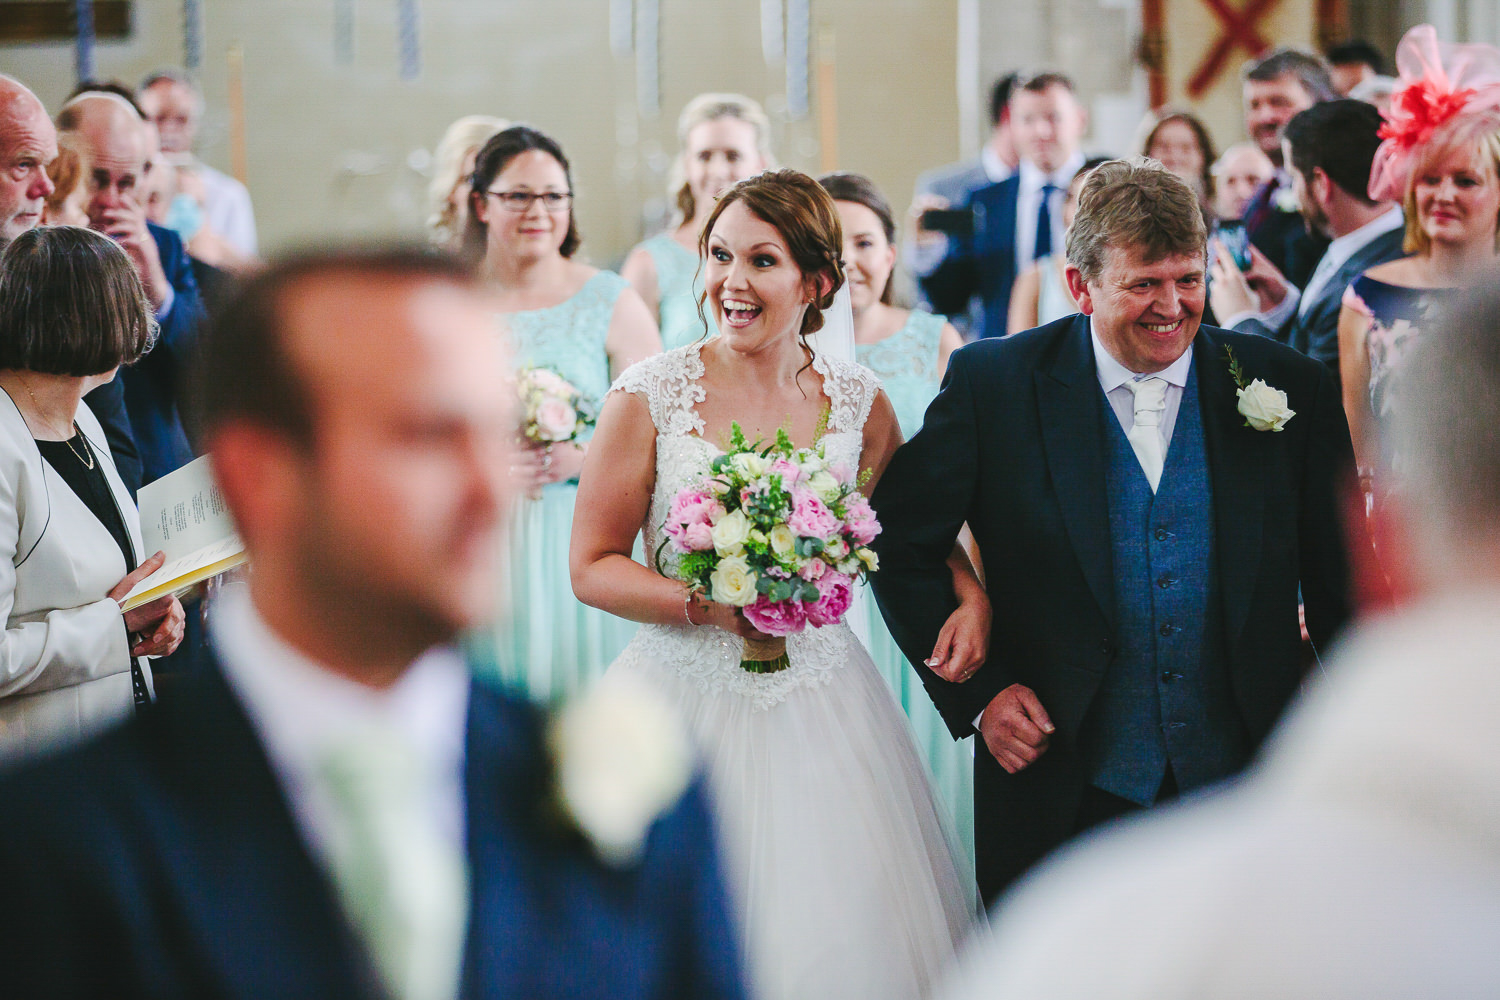 Brides smiling, walking down aisle with father